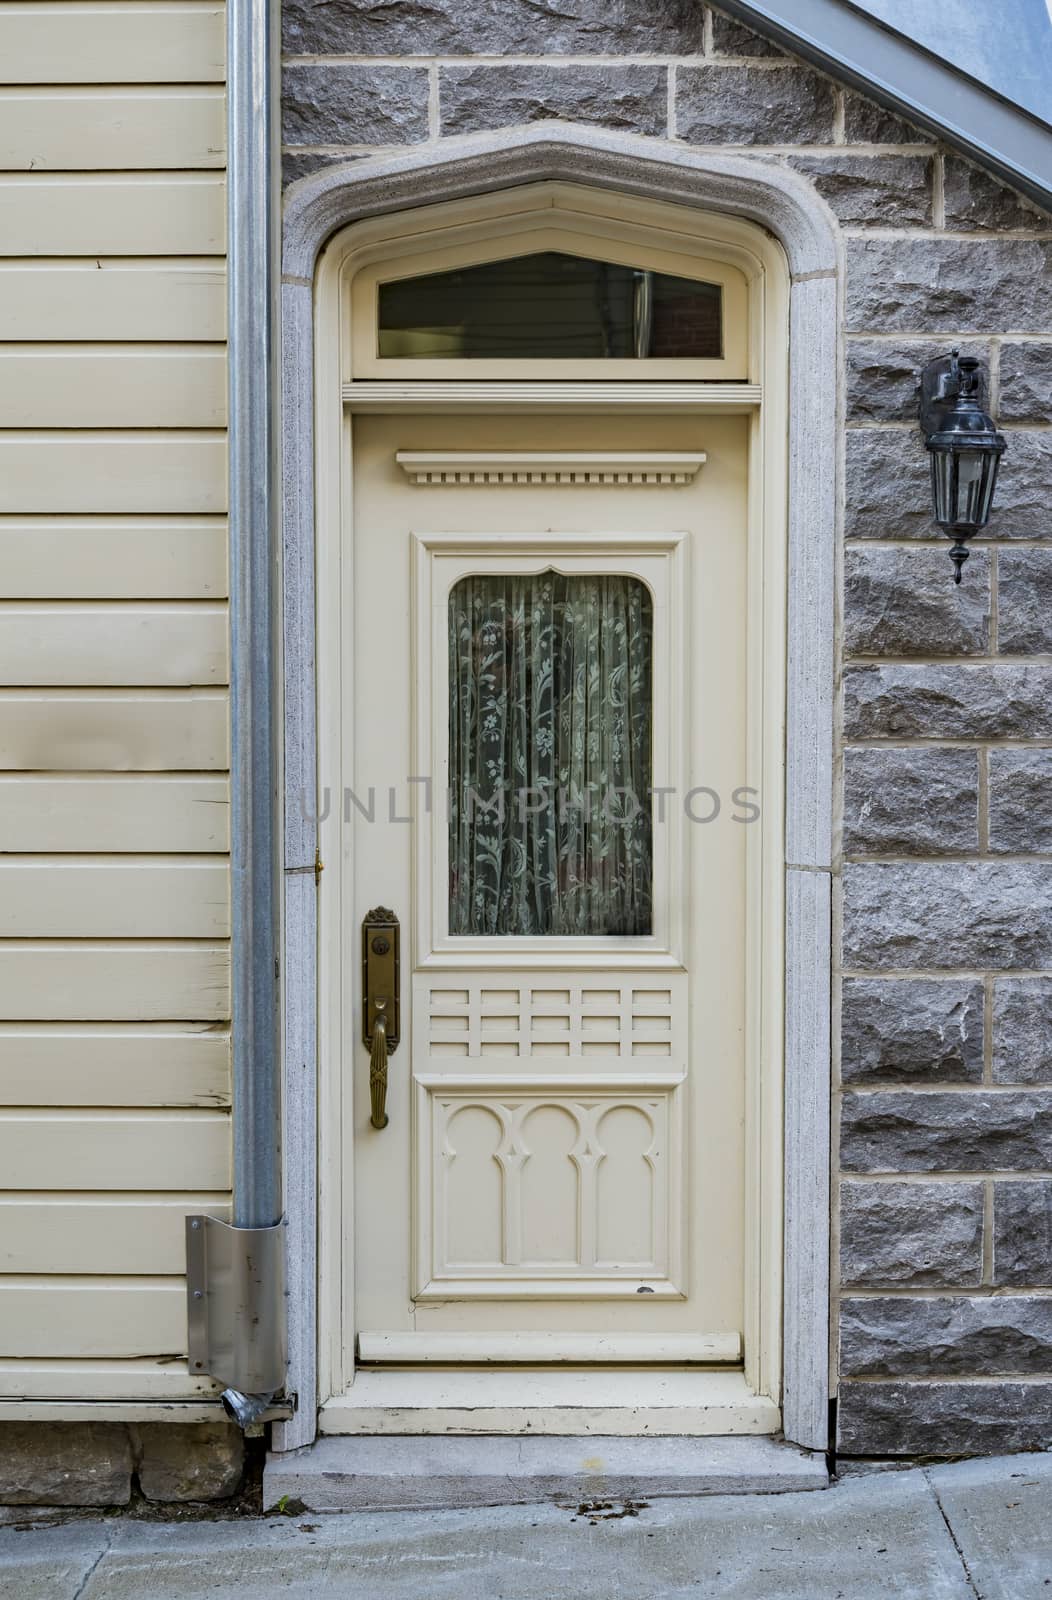 Wooden door entrance in the historical district in Quebec City, Canada